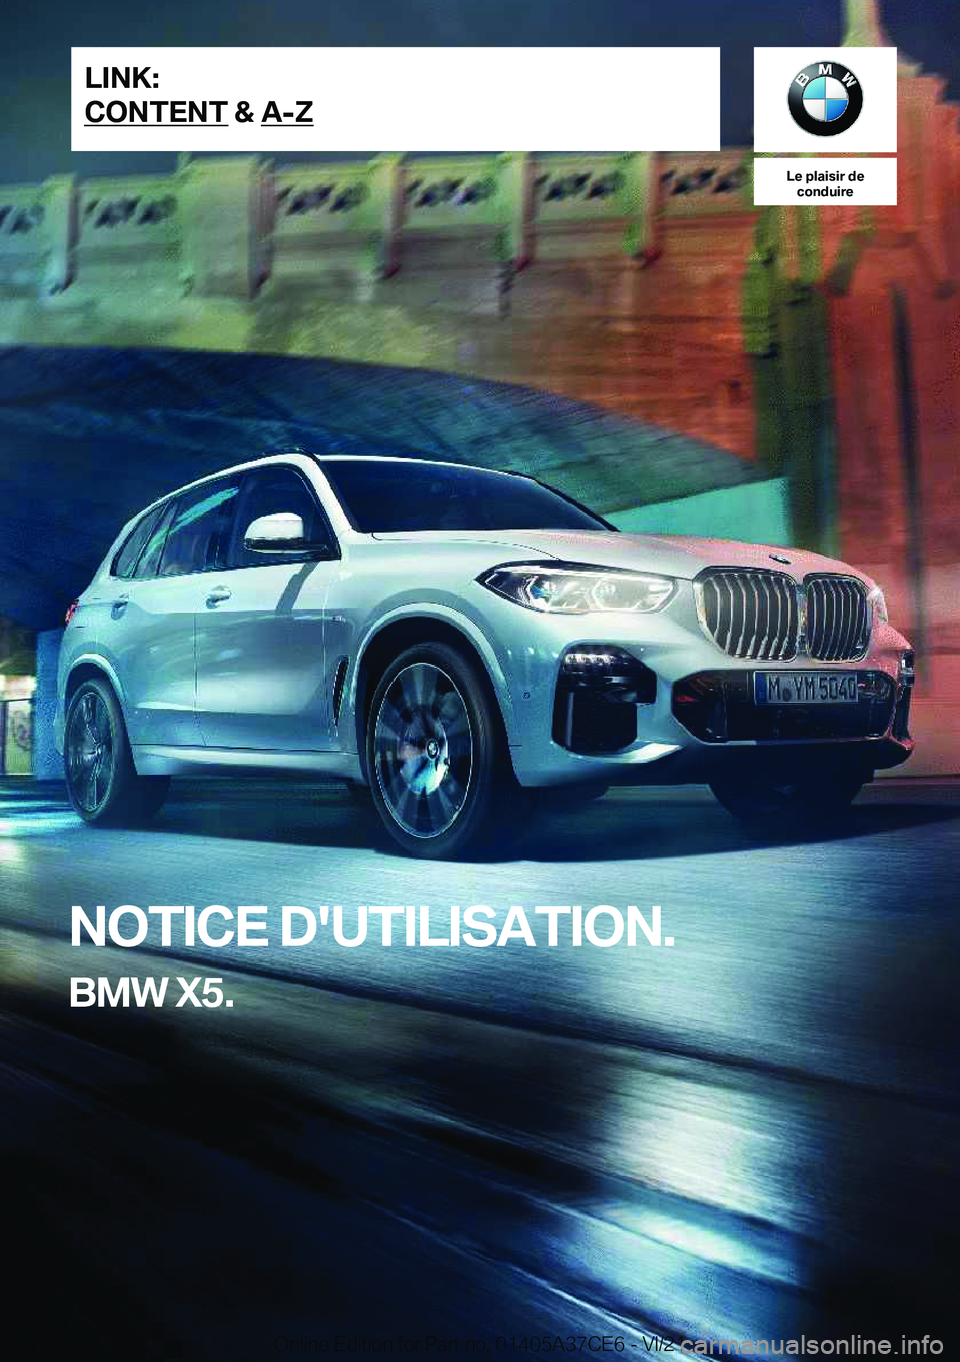 BMW X5 2022  Notices Demploi (in French) �L�e��p�l�a�i�s�i�r��d�e�c�o�n�d�u�i�r�e
�N�O�T�I�C�E��D�'�U�T�I�L�I�S�A�T�I�O�N�.
�B�M�W��X�5�.�L�I�N�K�:
�C�O�N�T�E�N�T��&��A�-�Z�O�n�l�i�n�e��E�d�i�t�i�o�n��f�o�r��P�a�r�t��n�o�.��0�